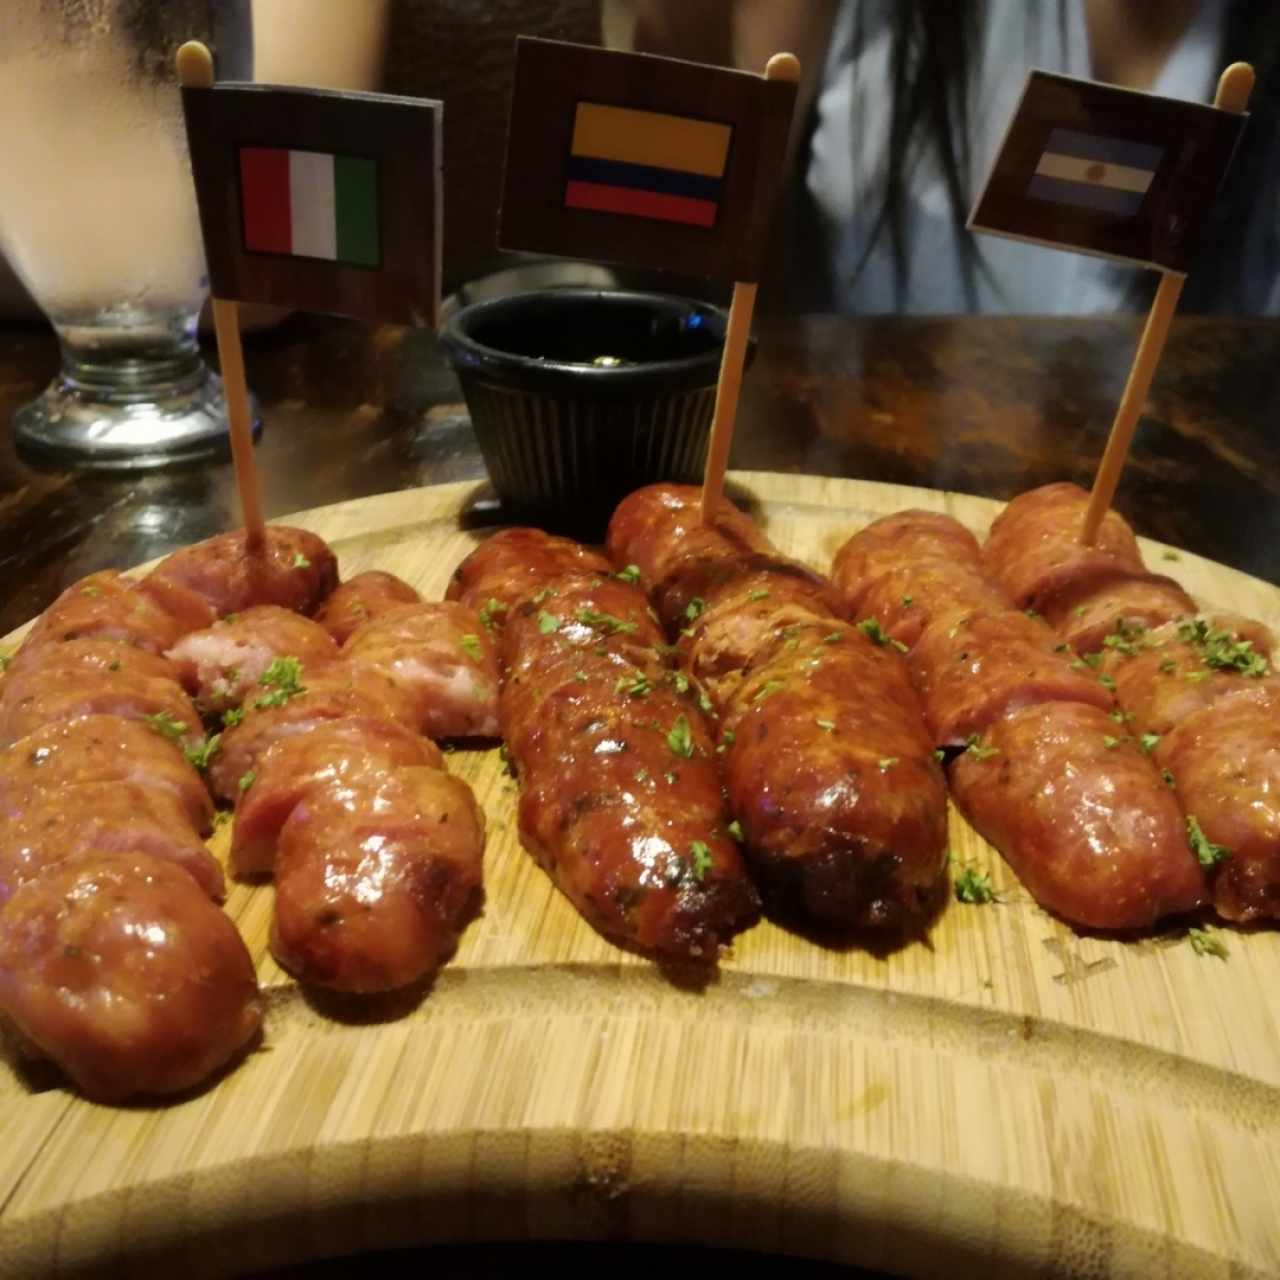 Traditional sausages